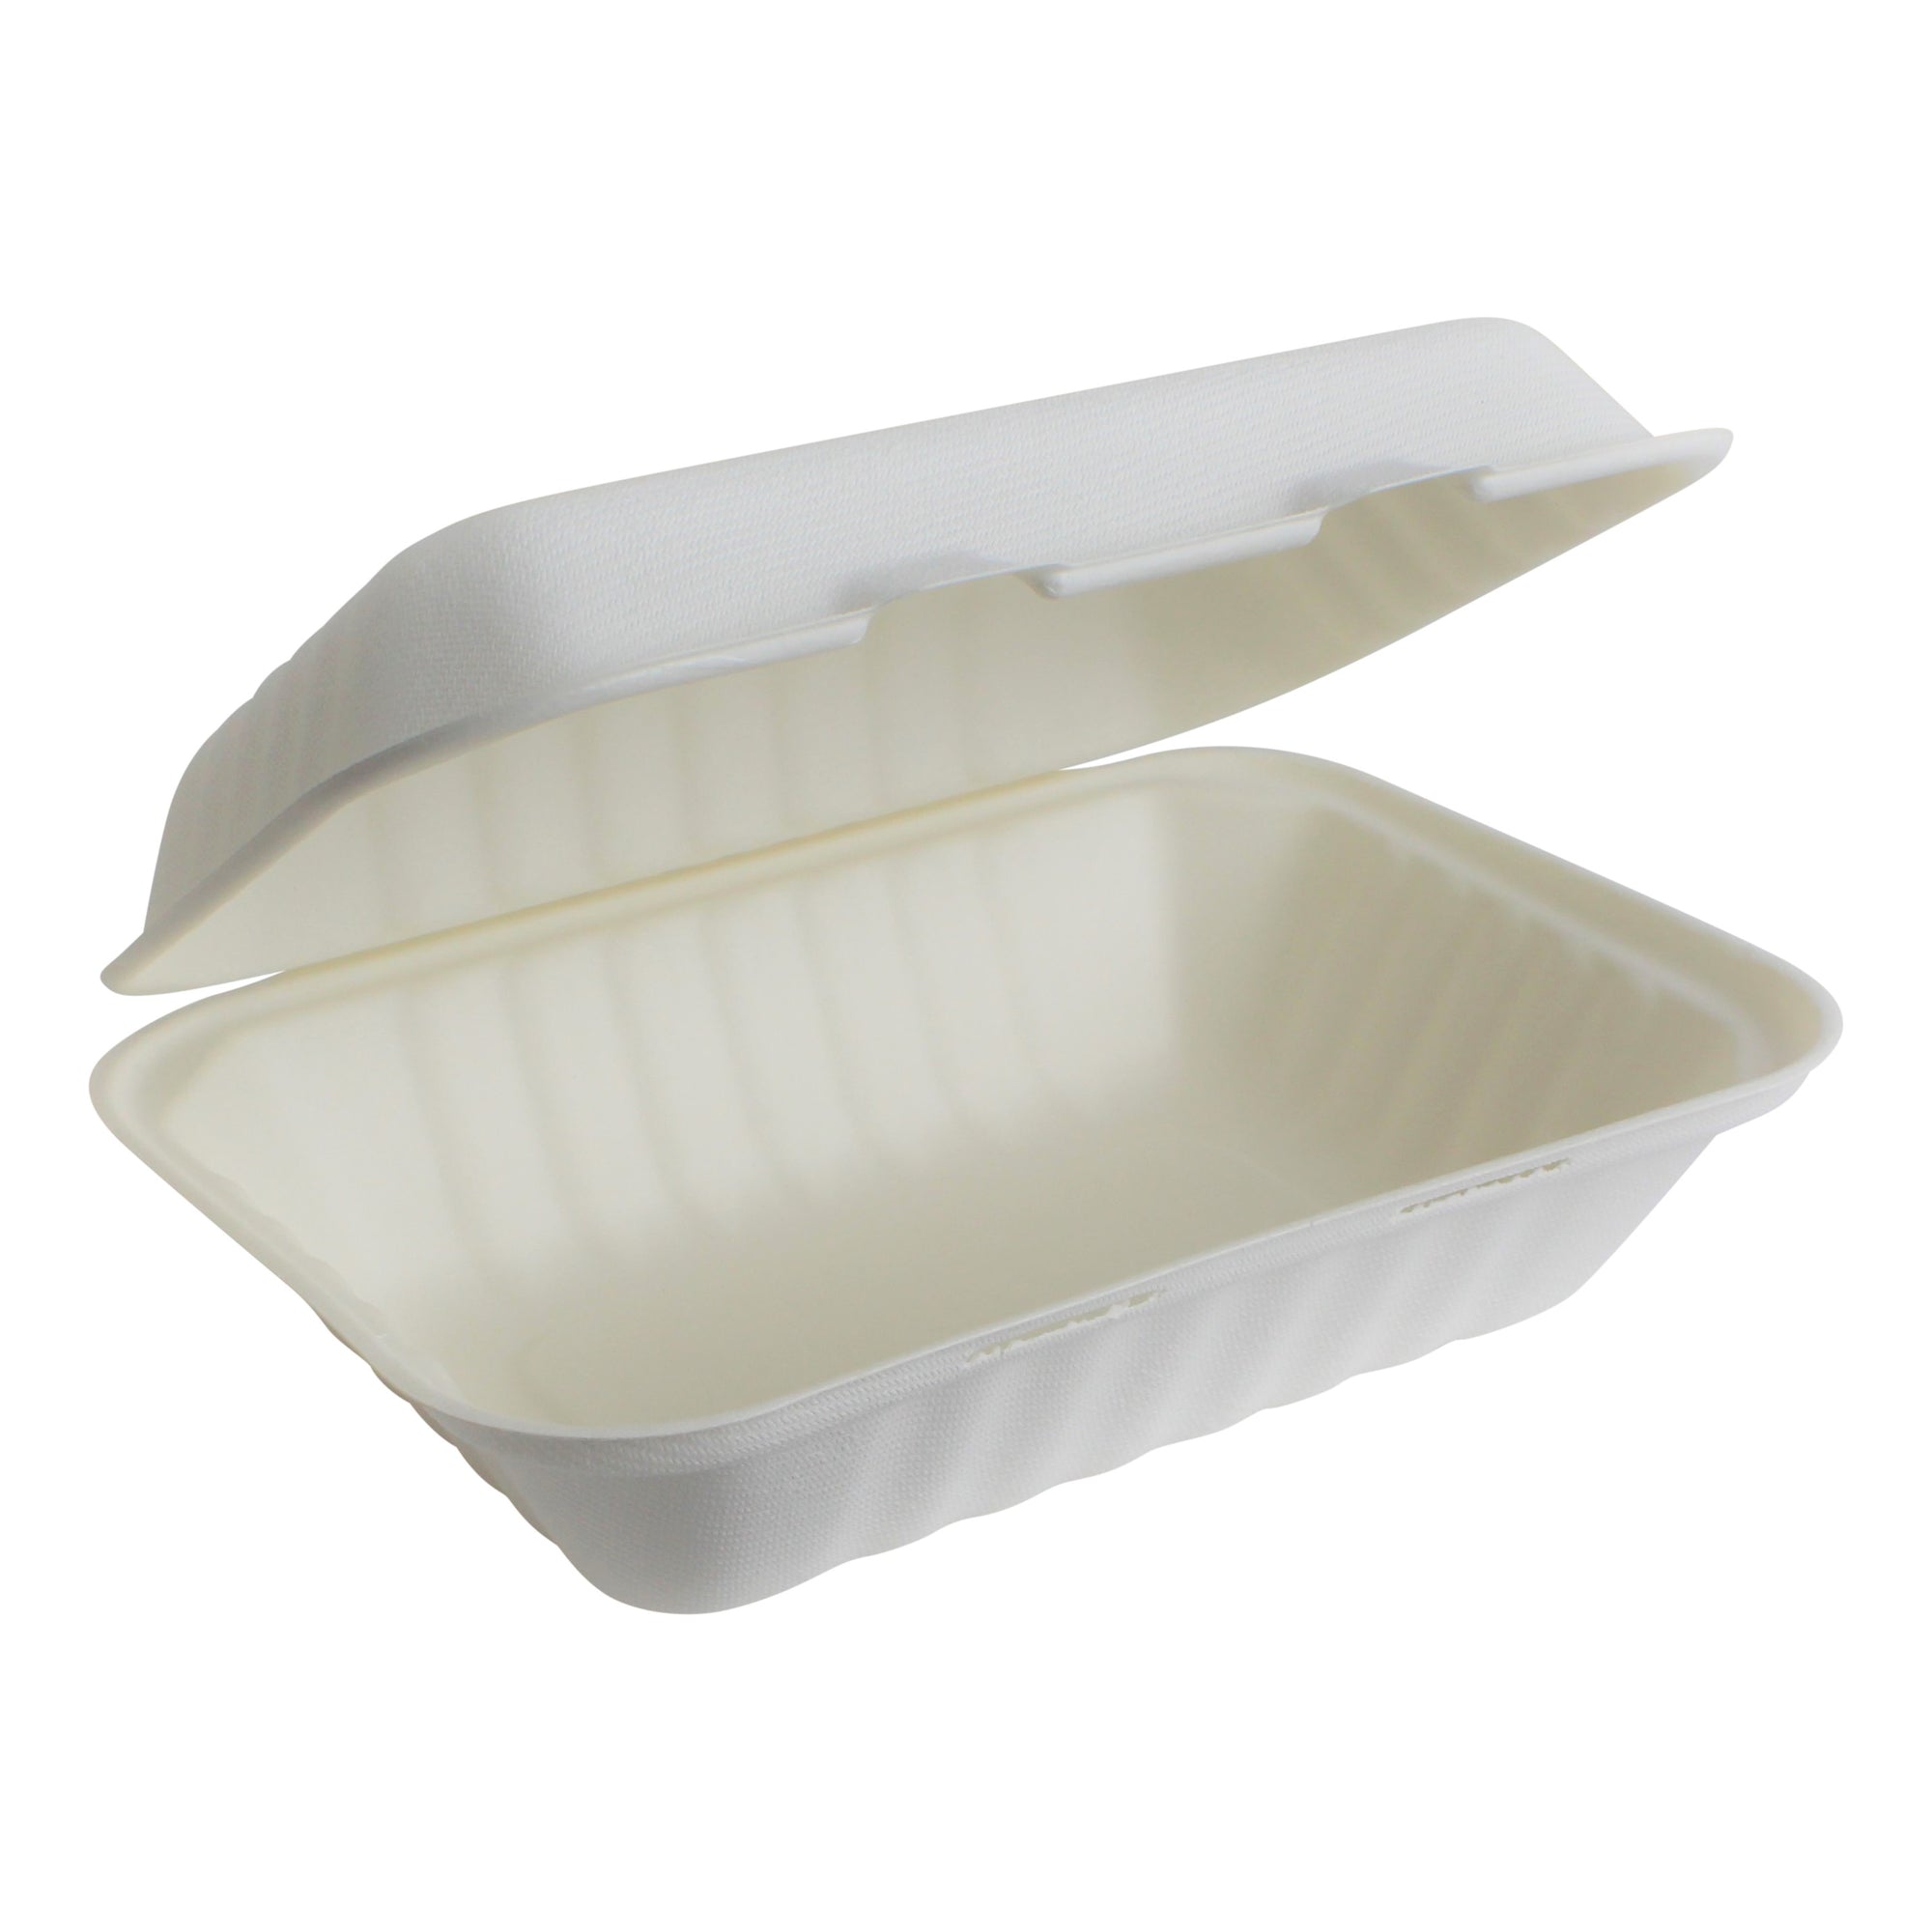 https://brheez.com/cdn/shop/products/Brheez_9x6x3_Biodegradable_Compostable_Sugarcane_Bagasse_1_Compartment_Takeout_Container_2_1547154794526_2000x.jpg?v=1588105153